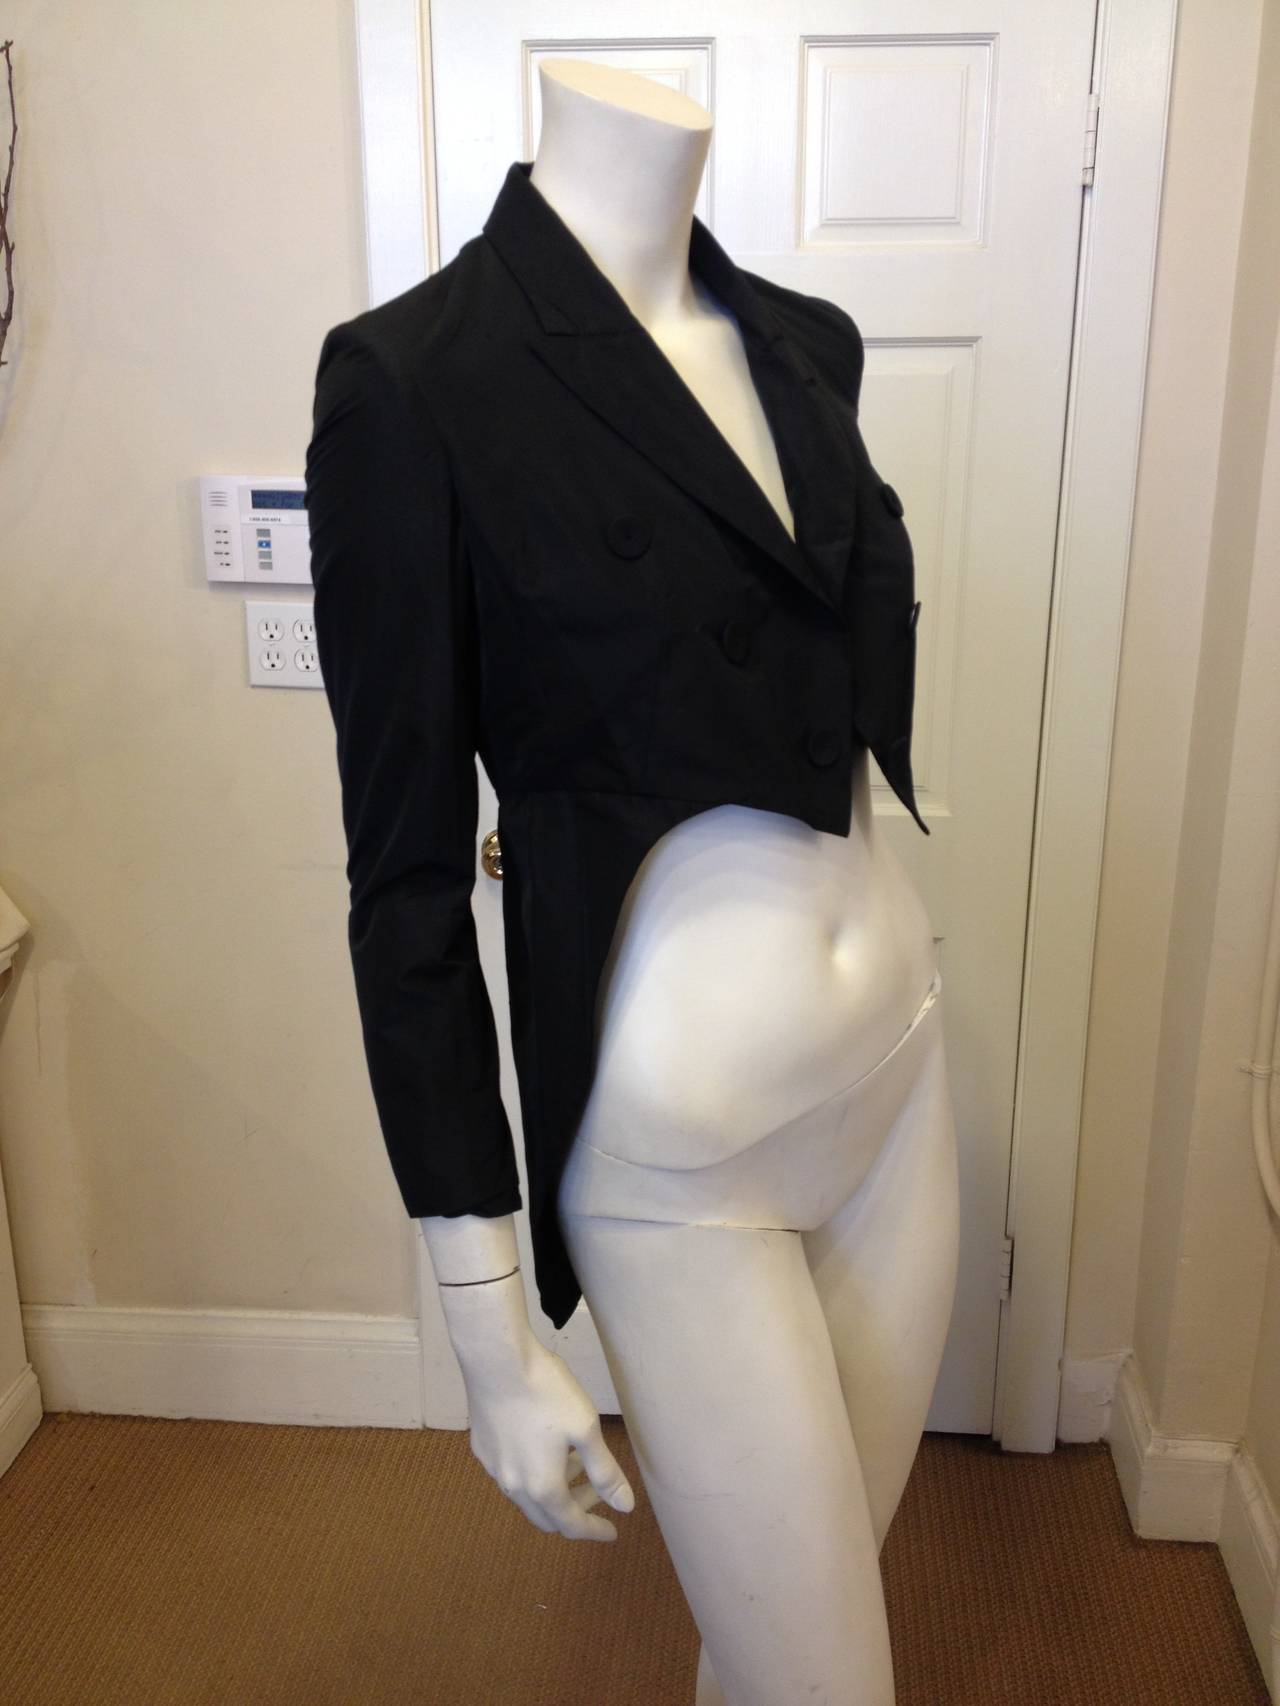 Evoke Marlene Dietrich in this sharp Gaultier. The tailcoat - as a garment - always has an ineffable androgynous glamor, both Old Hollywood and timeless, both masculine and feminine. This rendition is especially smart - the hemline is sharp and